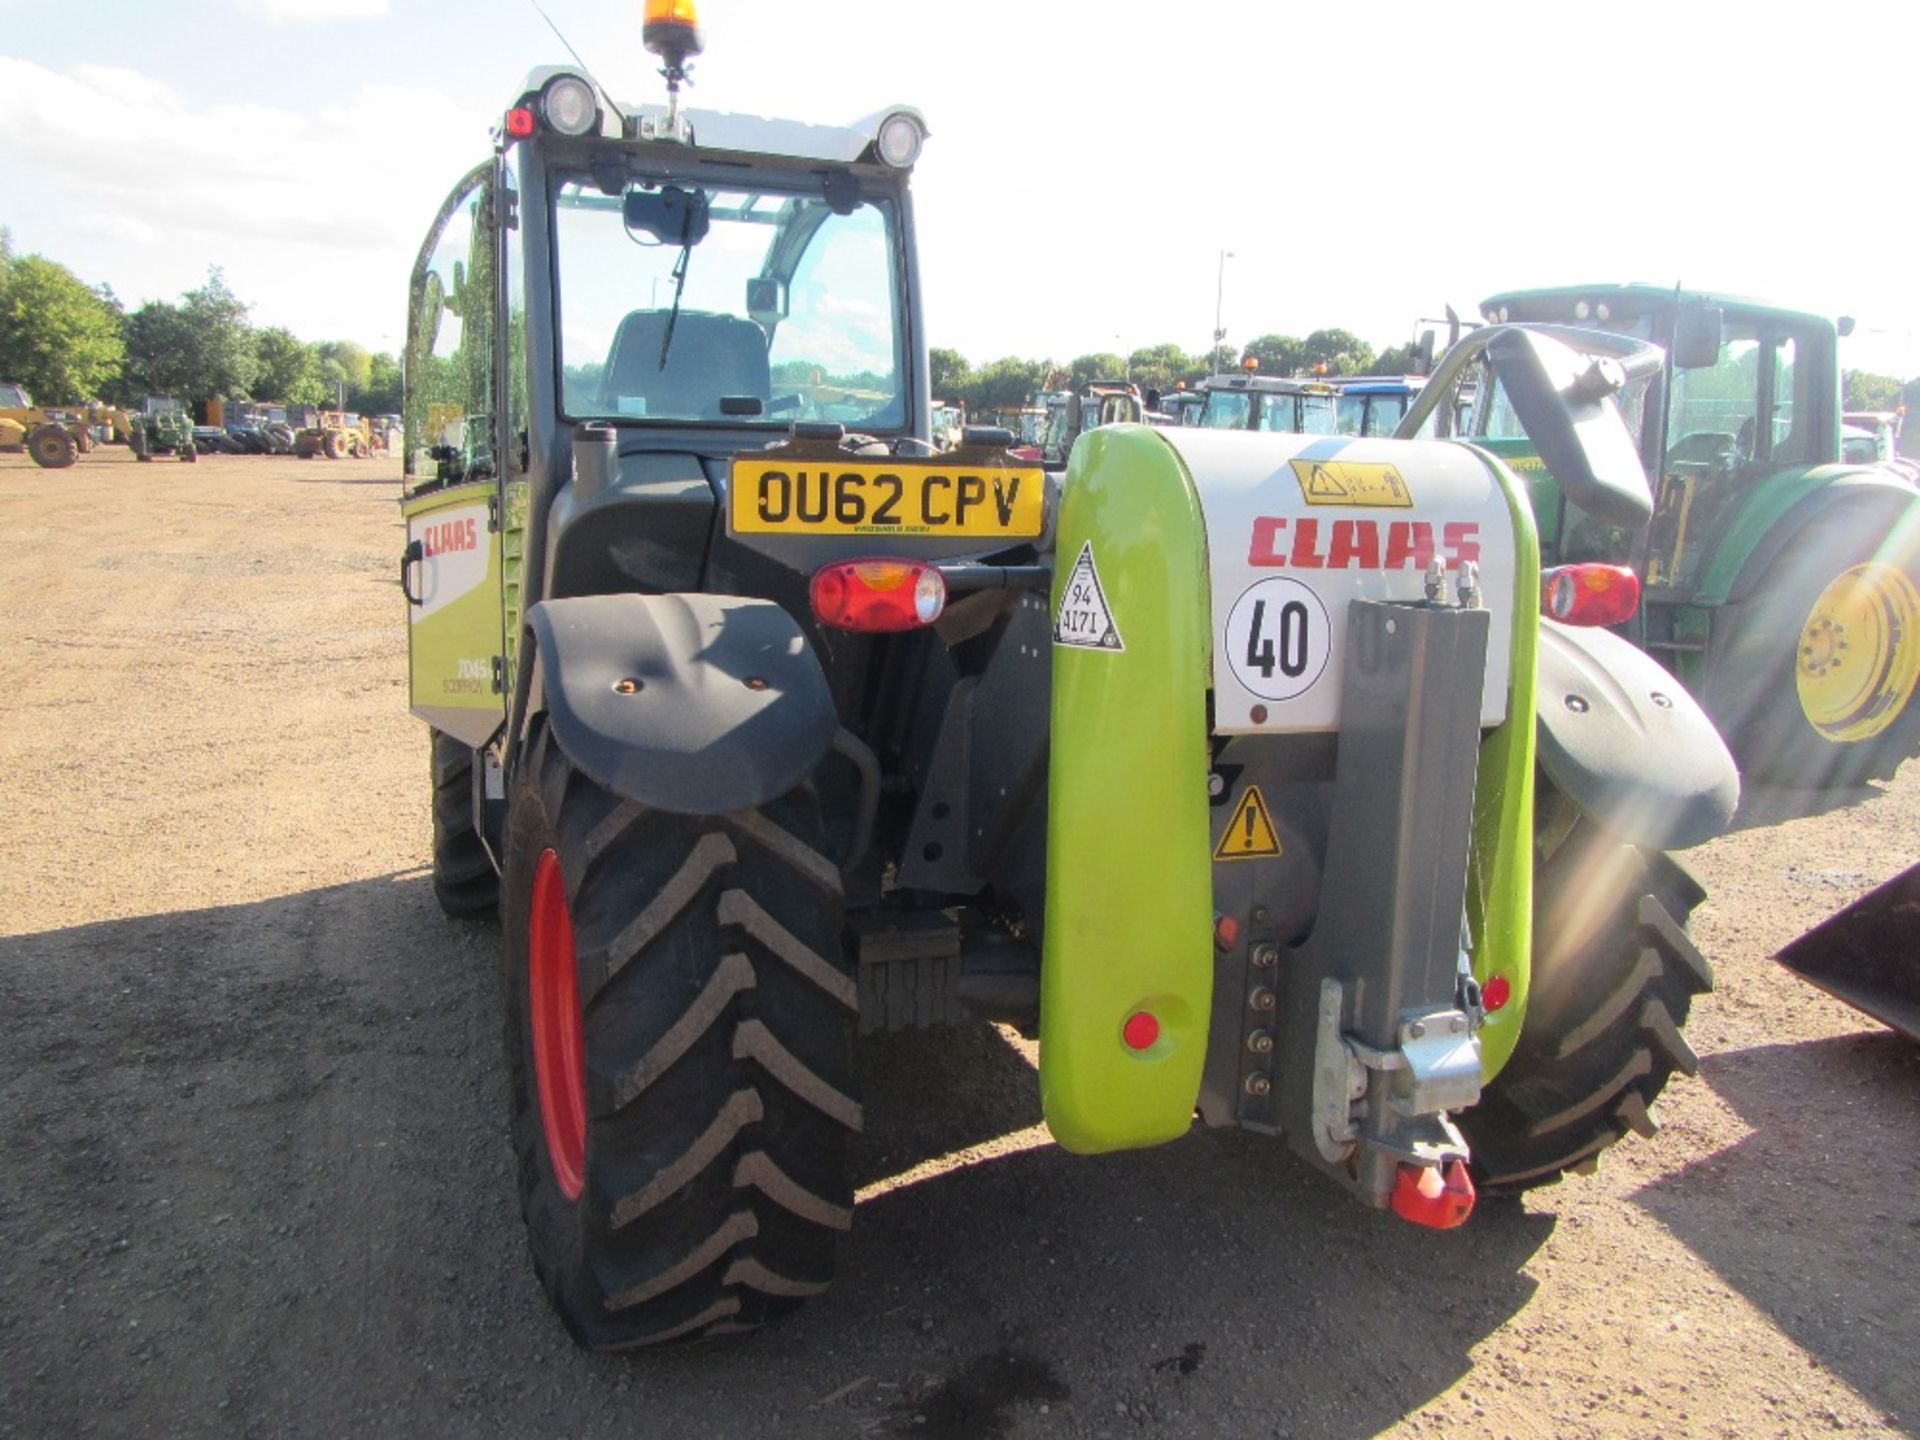 Claas Scorpion 7045. V5 will be supplied Reg. No. OU62 CPV Ser No 403030771 - Image 6 of 7